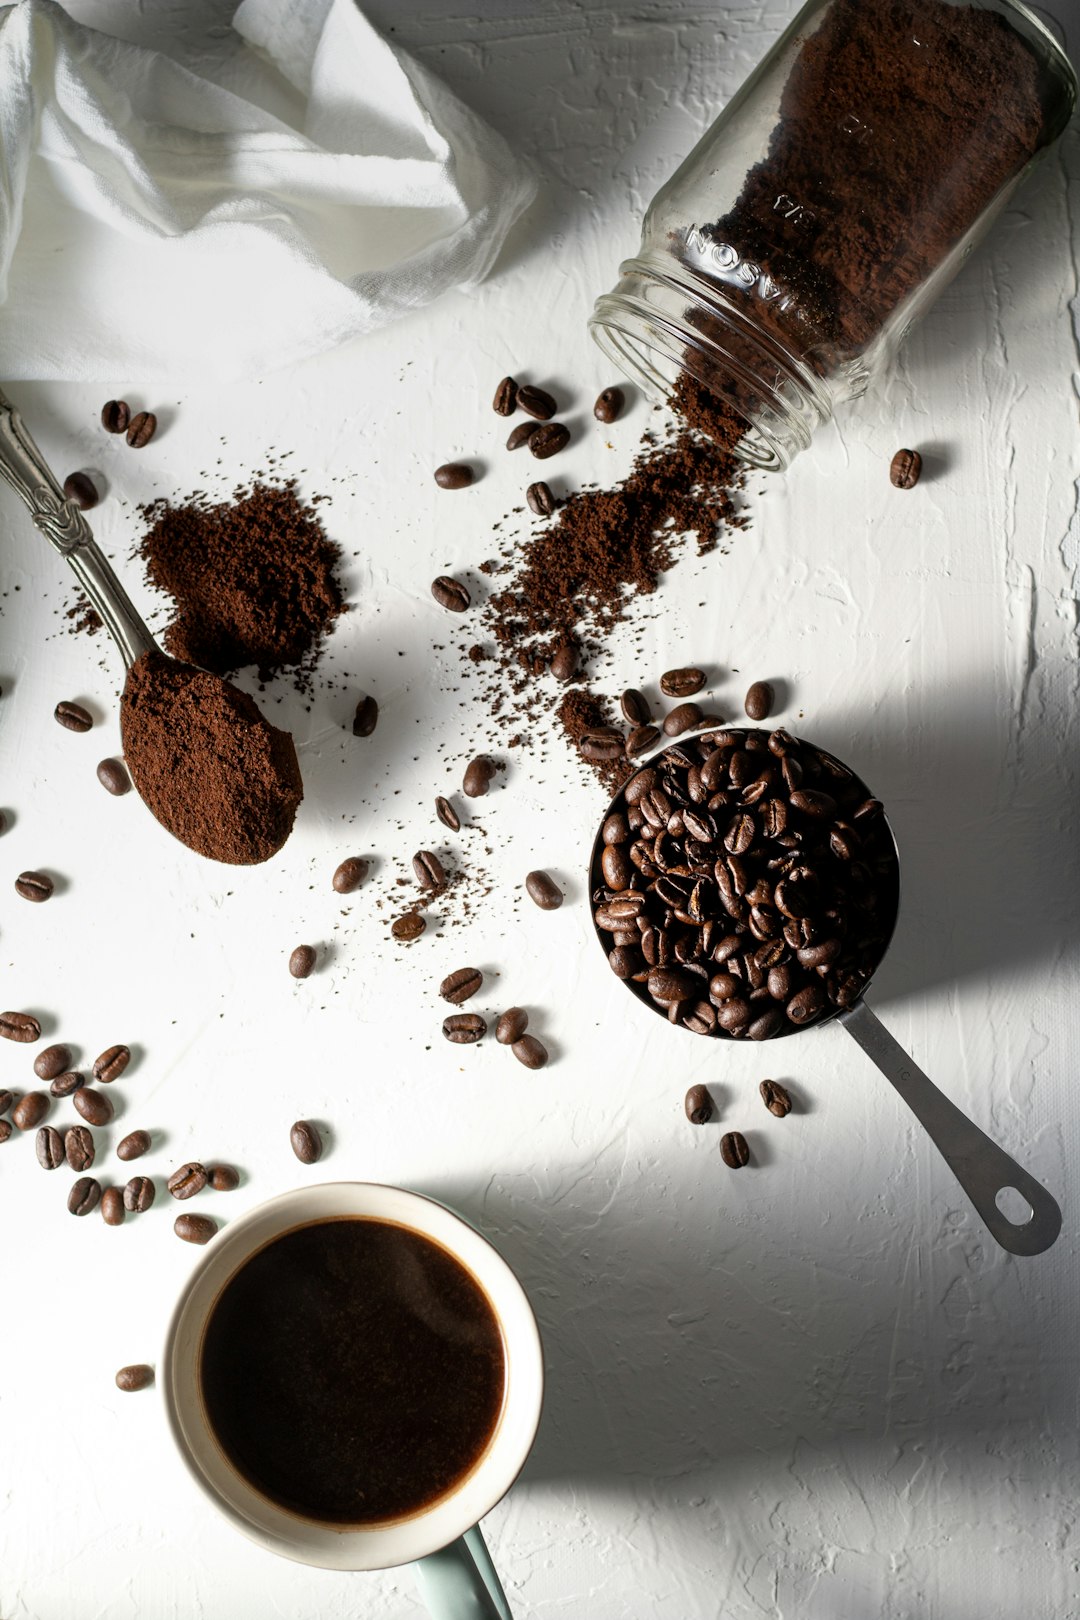 Specialty Coffee vs. Regular Coffee: What's the Difference?